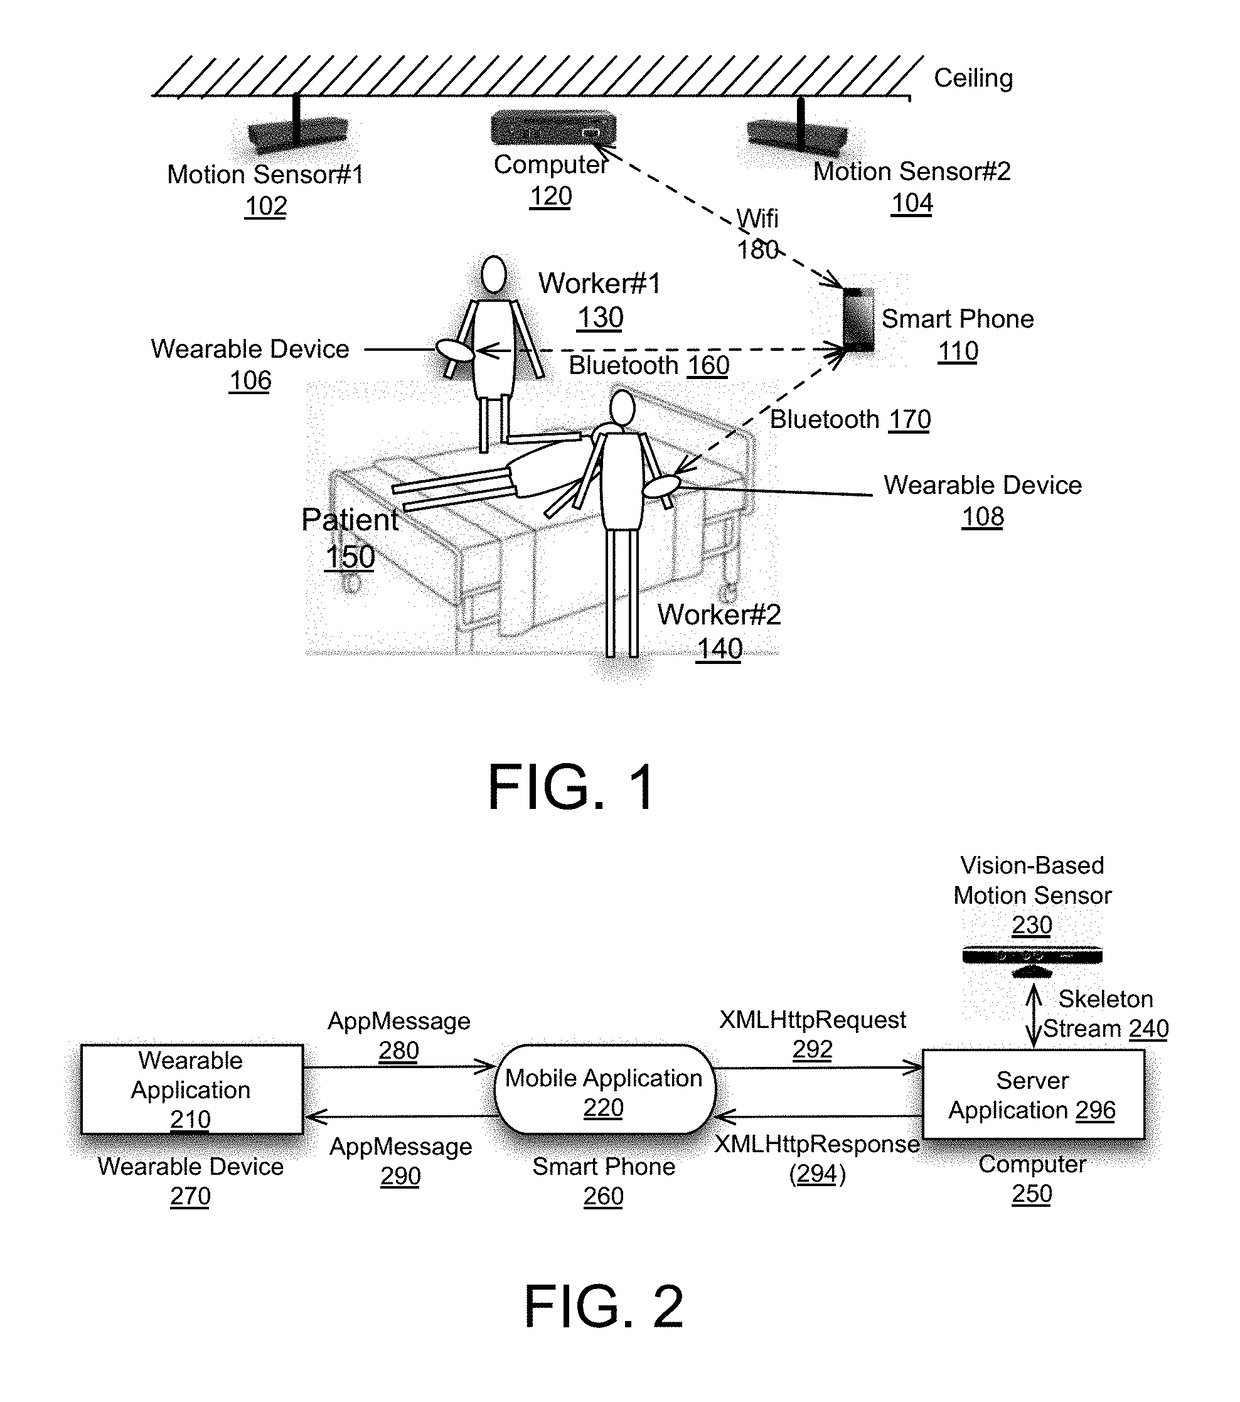 Systems and methods for privacy-aware motion tracking with notification feedback